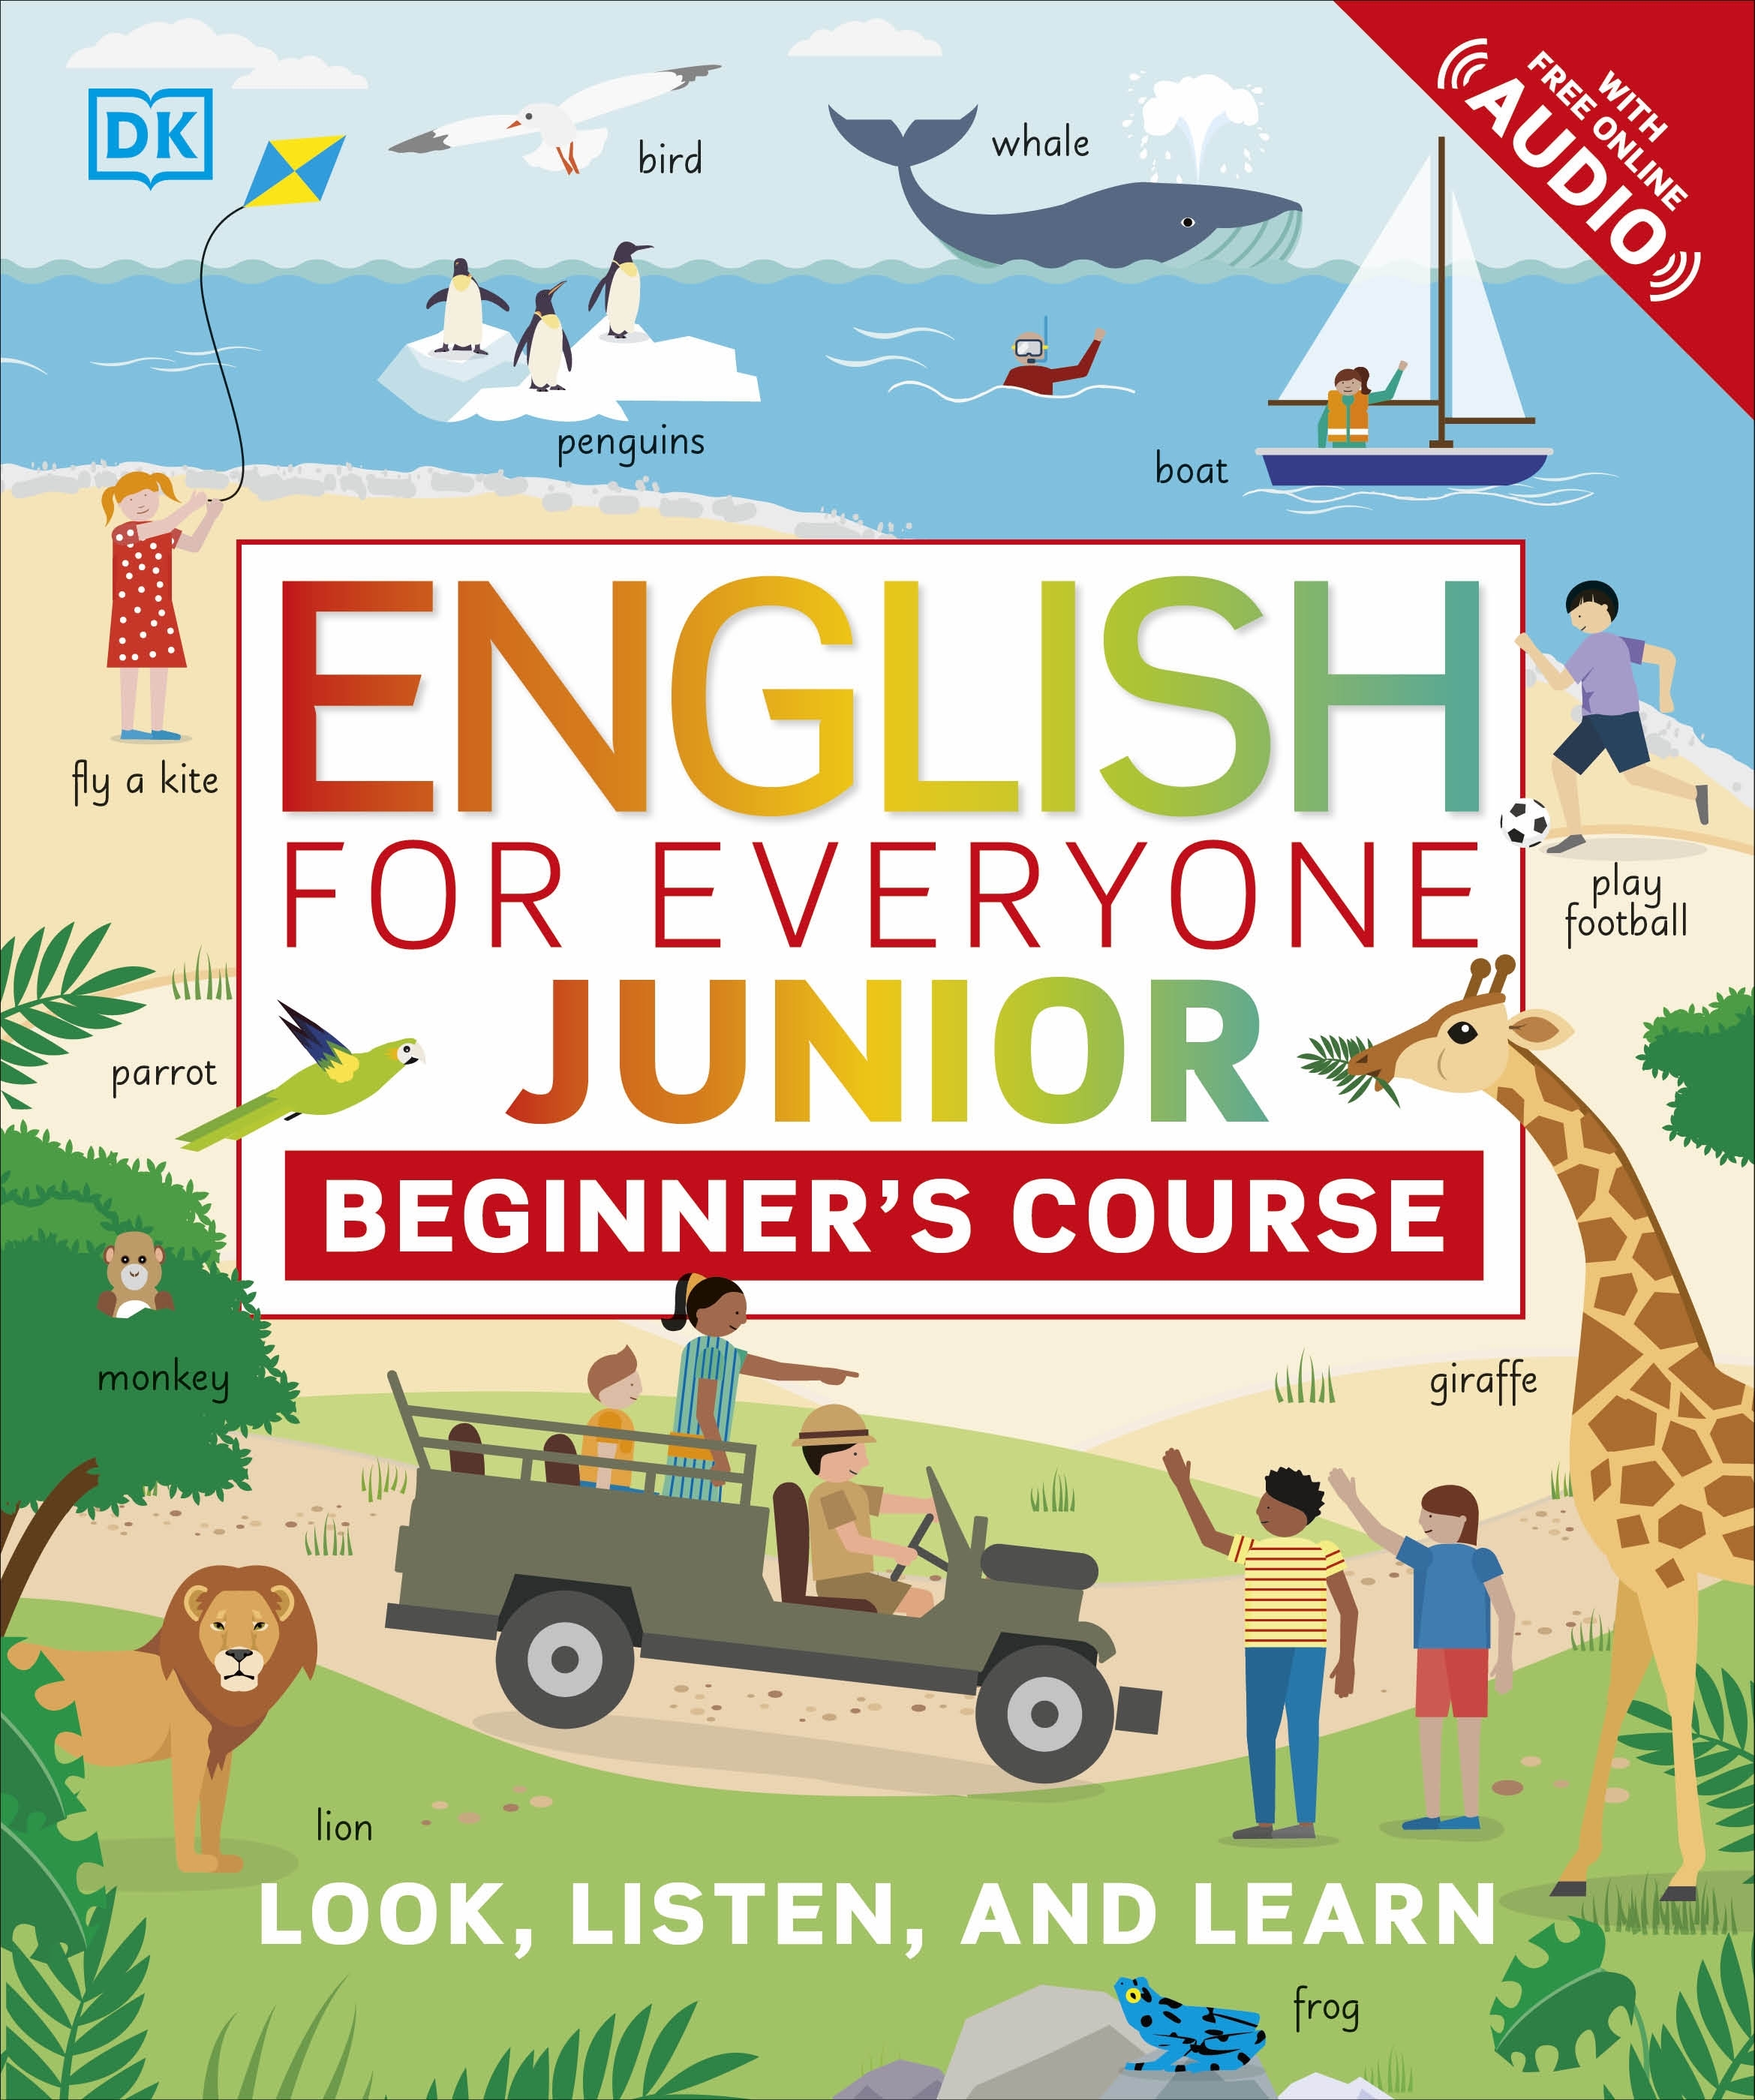 english-for-everyone-junior-beginner-s-course-by-dk-penguin-books-new-zealand